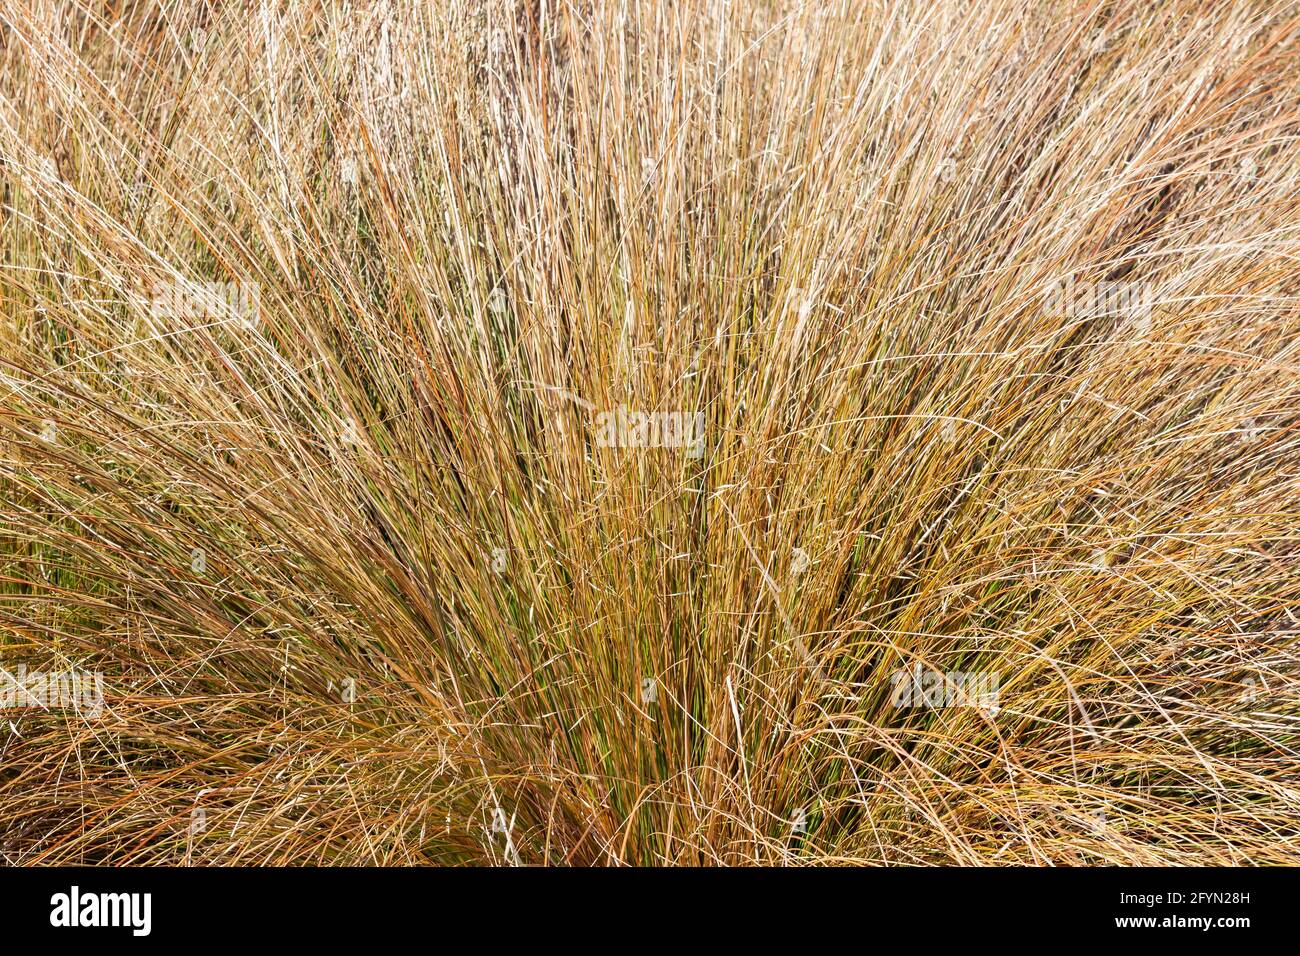 Chionochloa rubra an evergreen plant commonly known as red tussock grass Stock Photo